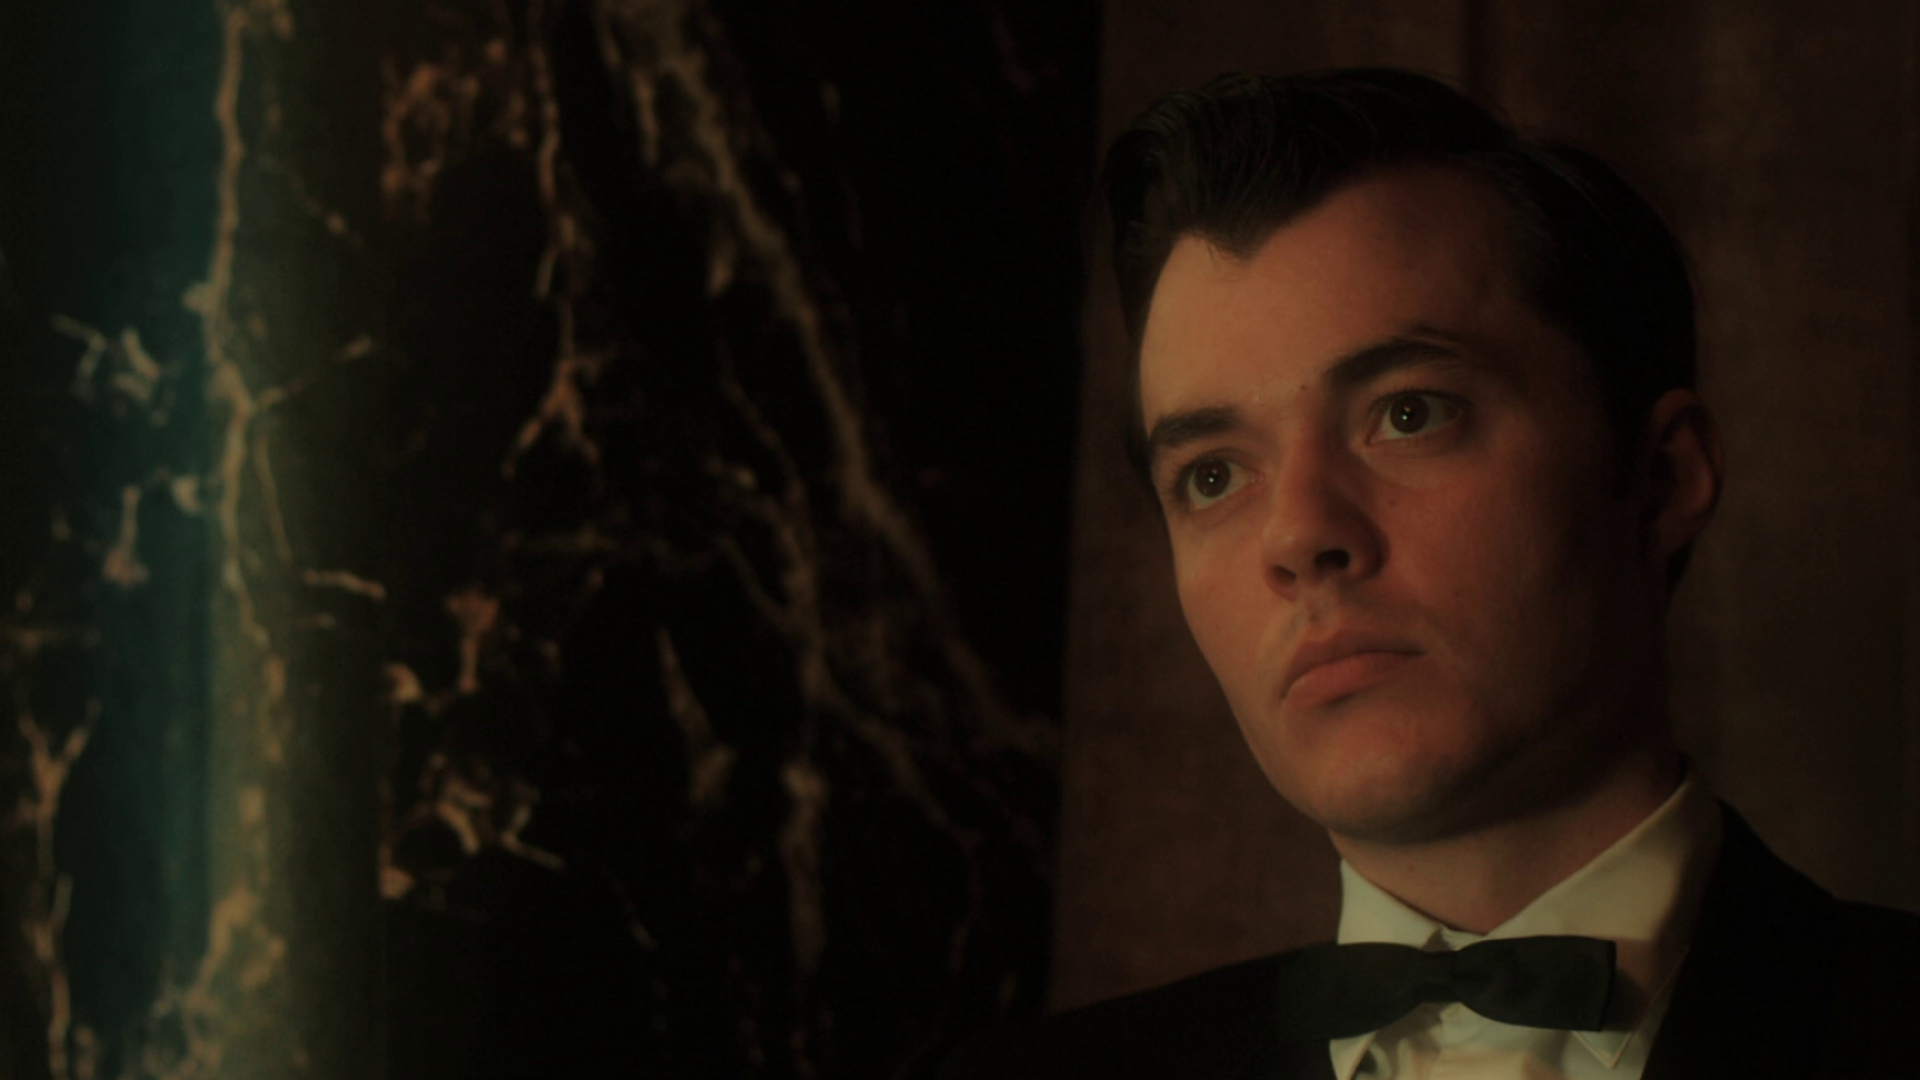 Pennyworth The Complete First Season, Blu-ray review, Movies, Pennyworth, 1920x1080 Full HD Desktop